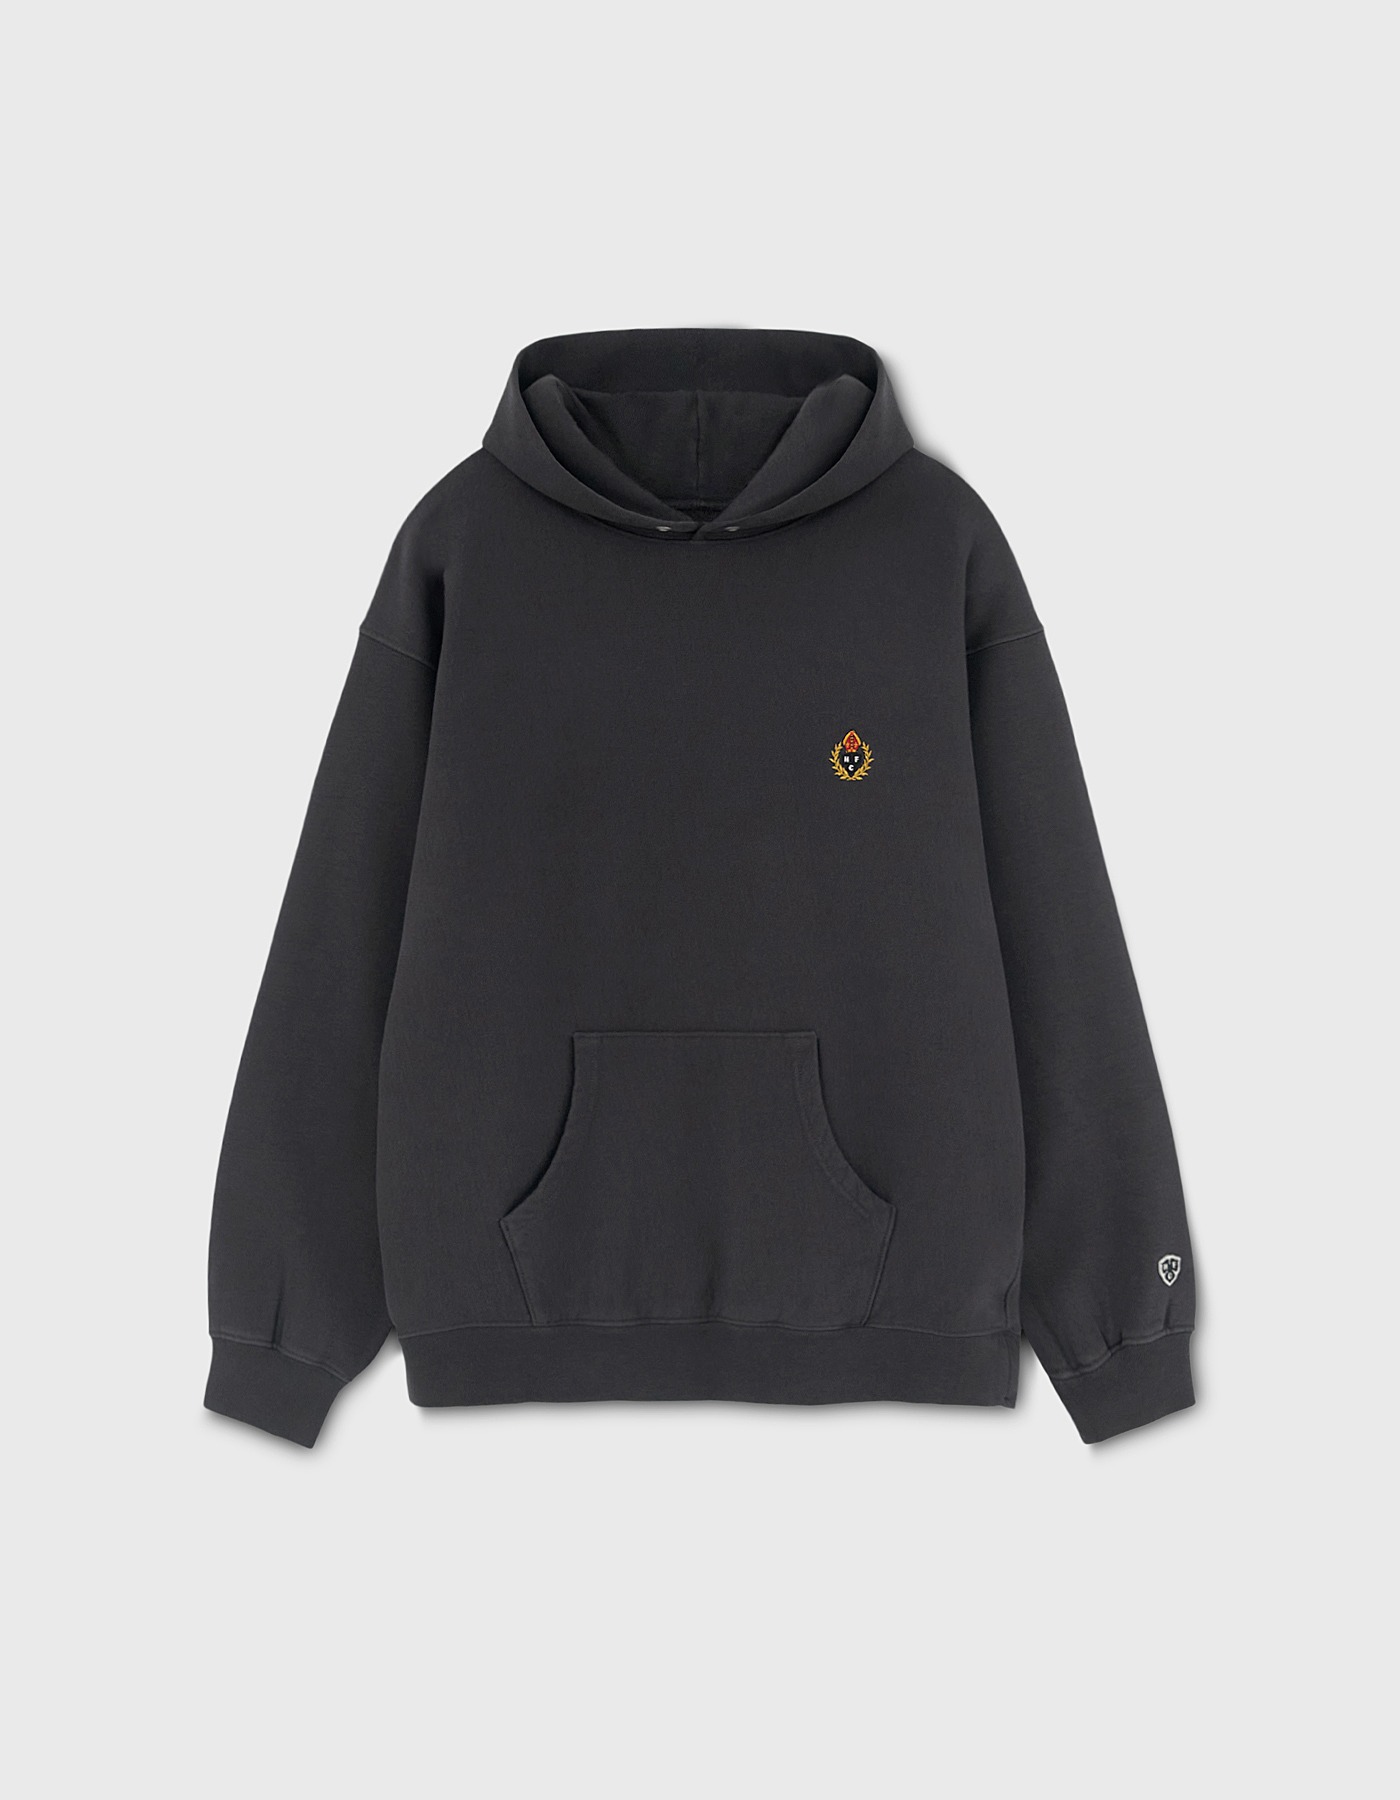 CREST 221 GYM HOODIE / Charcoal